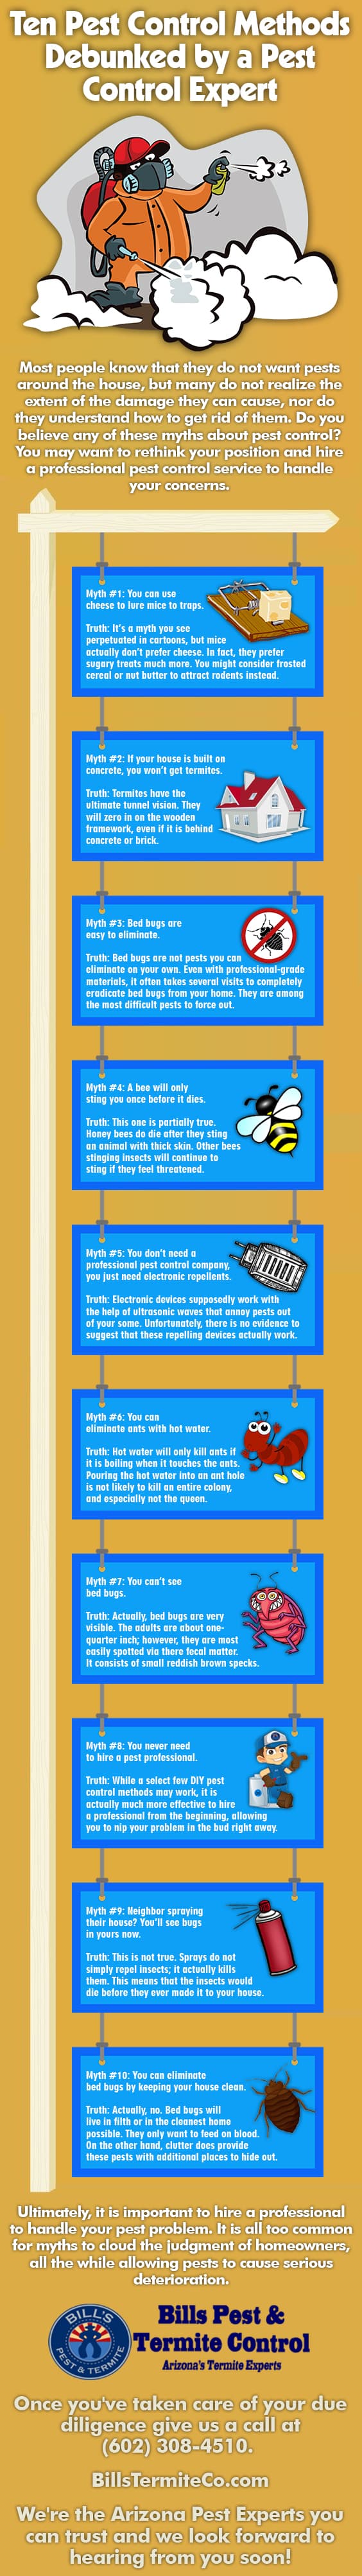 infographic-154-ten-pest-control-methods-debunked-by-a-pest-control-expert